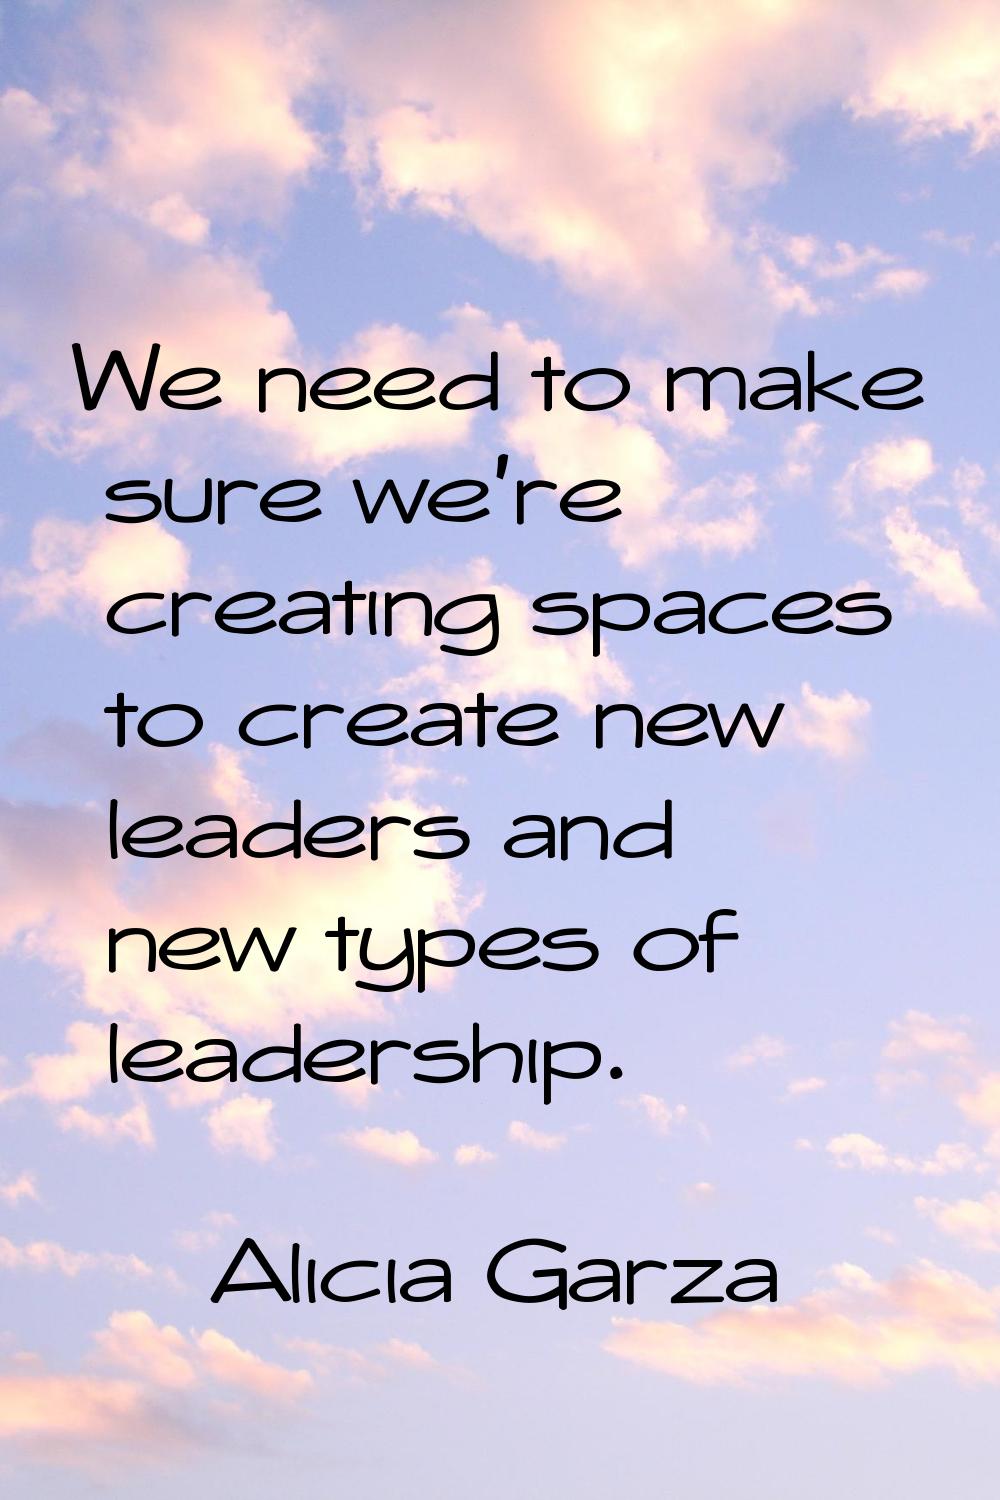 We need to make sure we're creating spaces to create new leaders and new types of leadership.